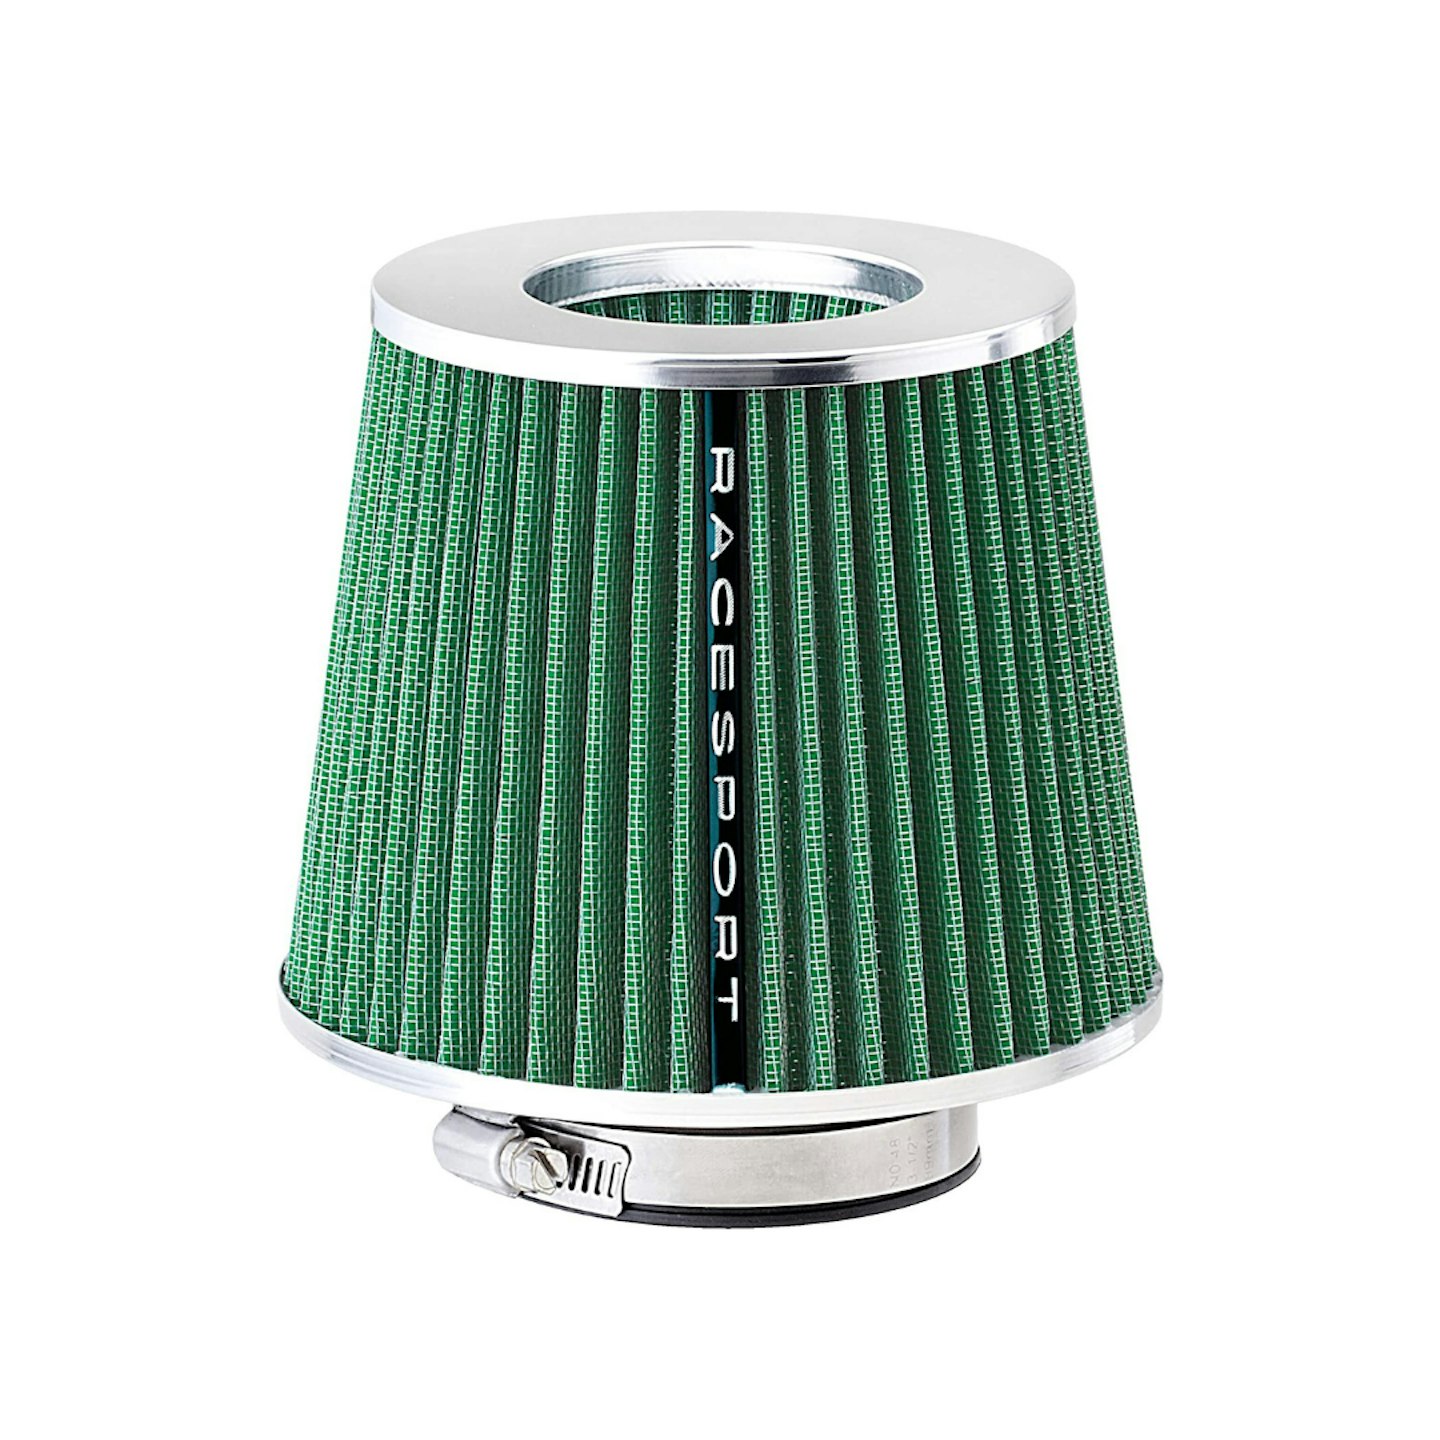 Sumex AIRSTGR Universal Sports Air Filter with Adaptors